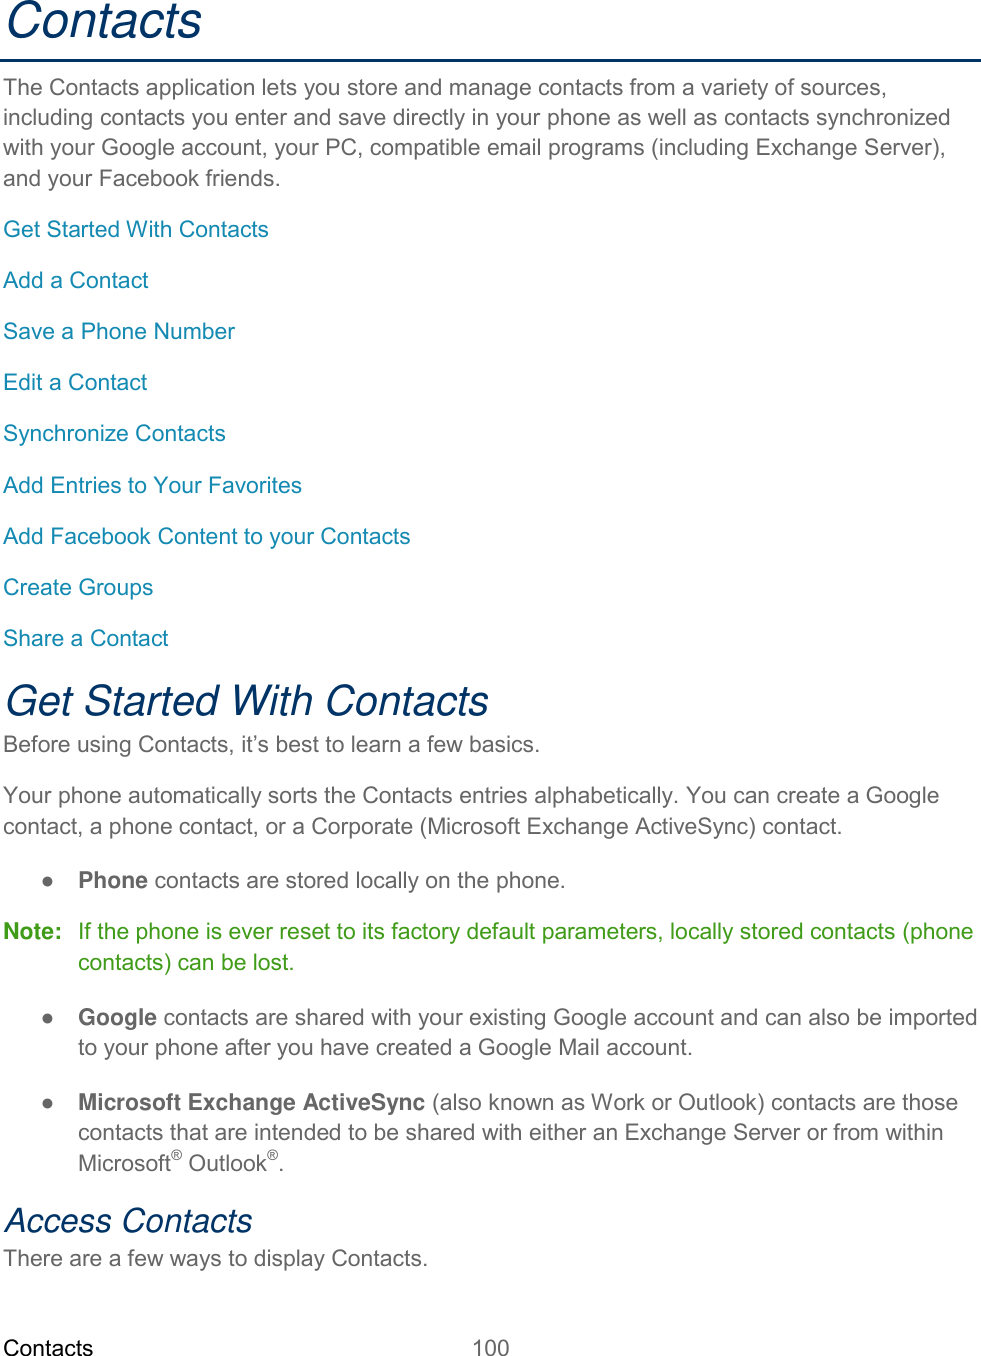 Contacts 100   Contacts The Contacts application lets you store and manage contacts from a variety of sources, including contacts you enter and save directly in your phone as well as contacts synchronized with your Google account, your PC, compatible email programs (including Exchange Server), and your Facebook friends. Get Started With Contacts Add a Contact Save a Phone Number Edit a Contact Synchronize Contacts Add Entries to Your Favorites Add Facebook Content to your Contacts Create Groups Share a Contact Get Started With Contacts Before using Contacts, it’s best to learn a few basics. Your phone automatically sorts the Contacts entries alphabetically. You can create a Google contact, a phone contact, or a Corporate (Microsoft Exchange ActiveSync) contact. ● Phone contacts are stored locally on the phone. Note:   If the phone is ever reset to its factory default parameters, locally stored contacts (phone contacts) can be lost. ● Google contacts are shared with your existing Google account and can also be imported to your phone after you have created a Google Mail account. ● Microsoft Exchange ActiveSync (also known as Work or Outlook) contacts are those contacts that are intended to be shared with either an Exchange Server or from within Microsoft® Outlook®. Access Contacts There are a few ways to display Contacts. 